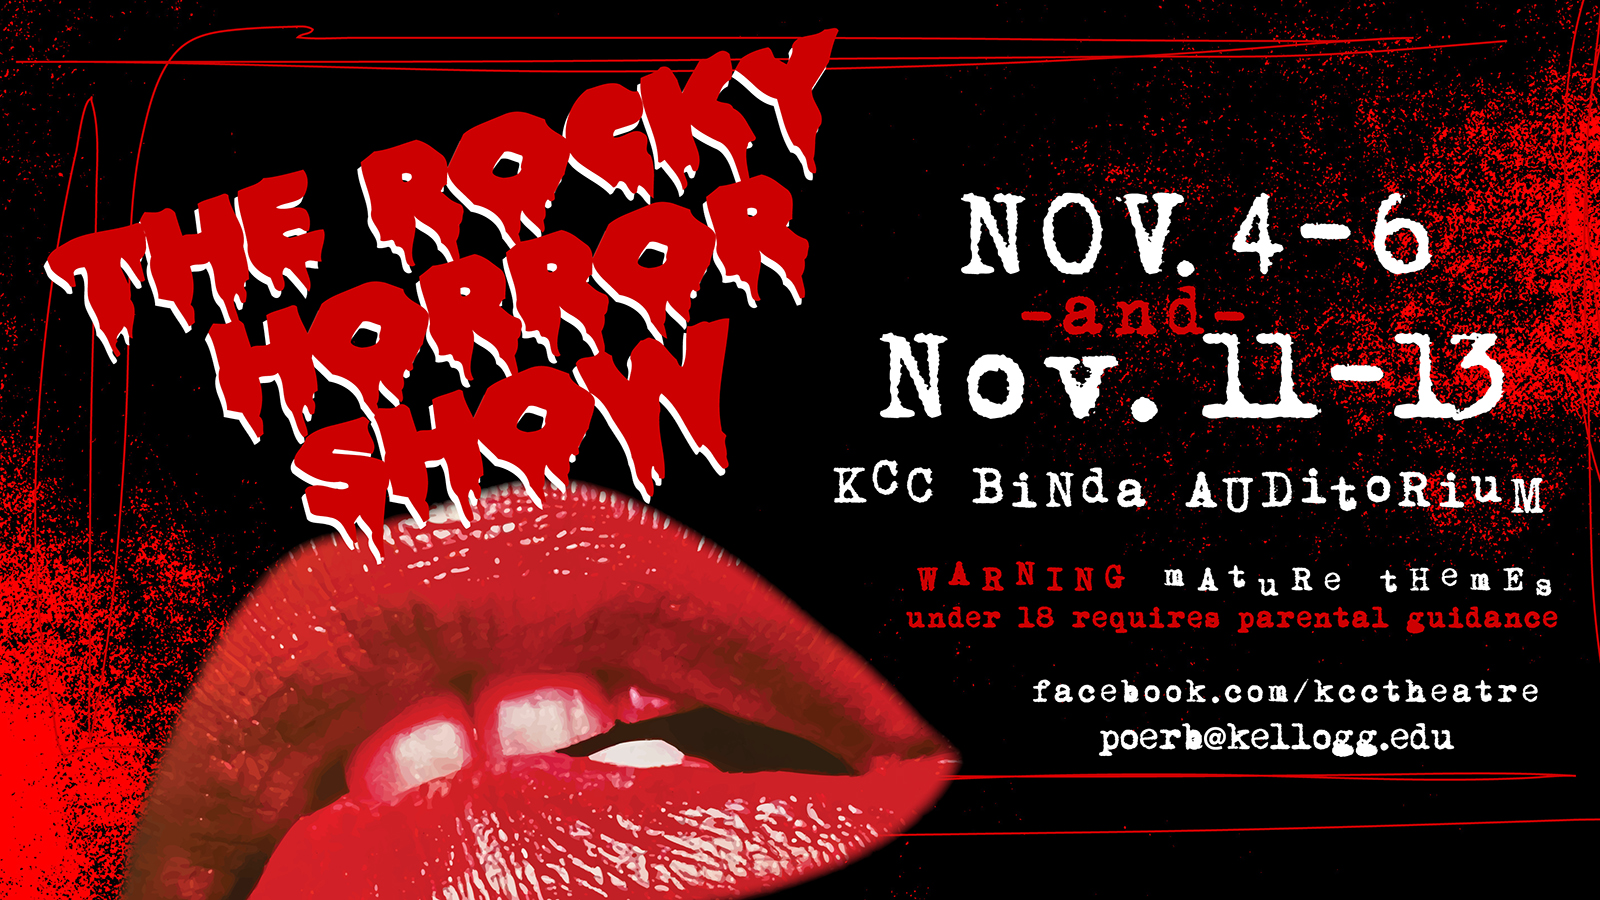 A text slide featuring large red lips and "The Rocky Horror Show" logo.